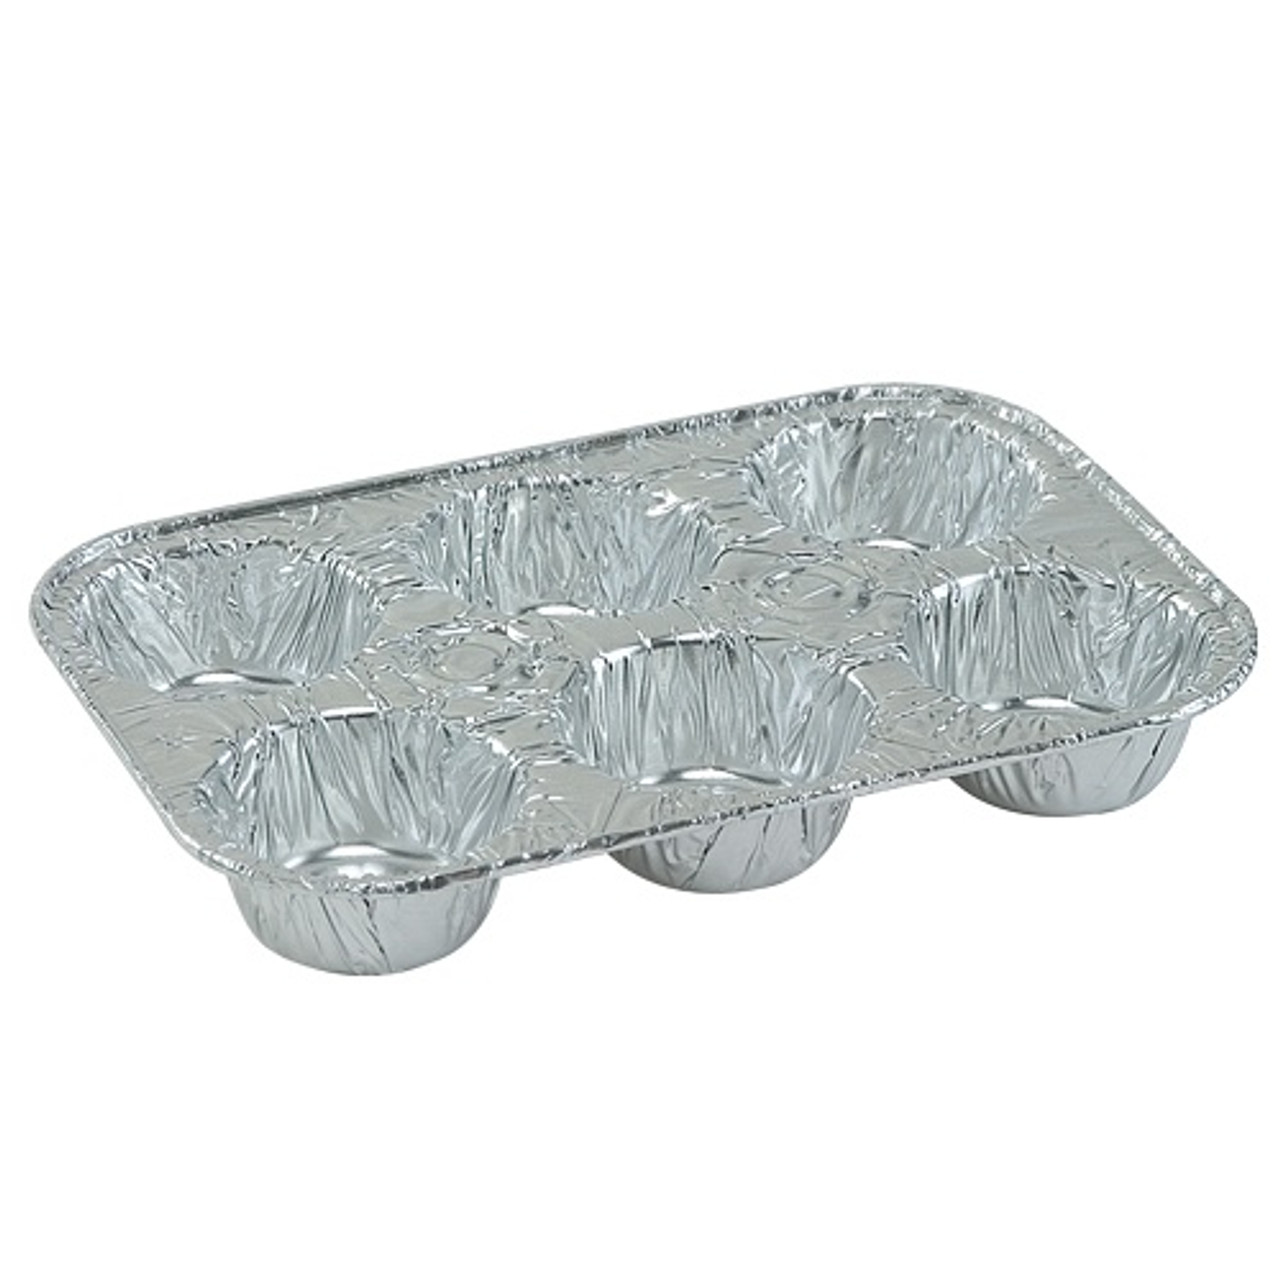 https://cdn11.bigcommerce.com/s-hgqmwywp99/images/stencil/1280x1280/products/49331/44122/aluminum-disposable-6-cup-muffin-pan-3__89832.1675880332.jpg?c=1?imbypass=on